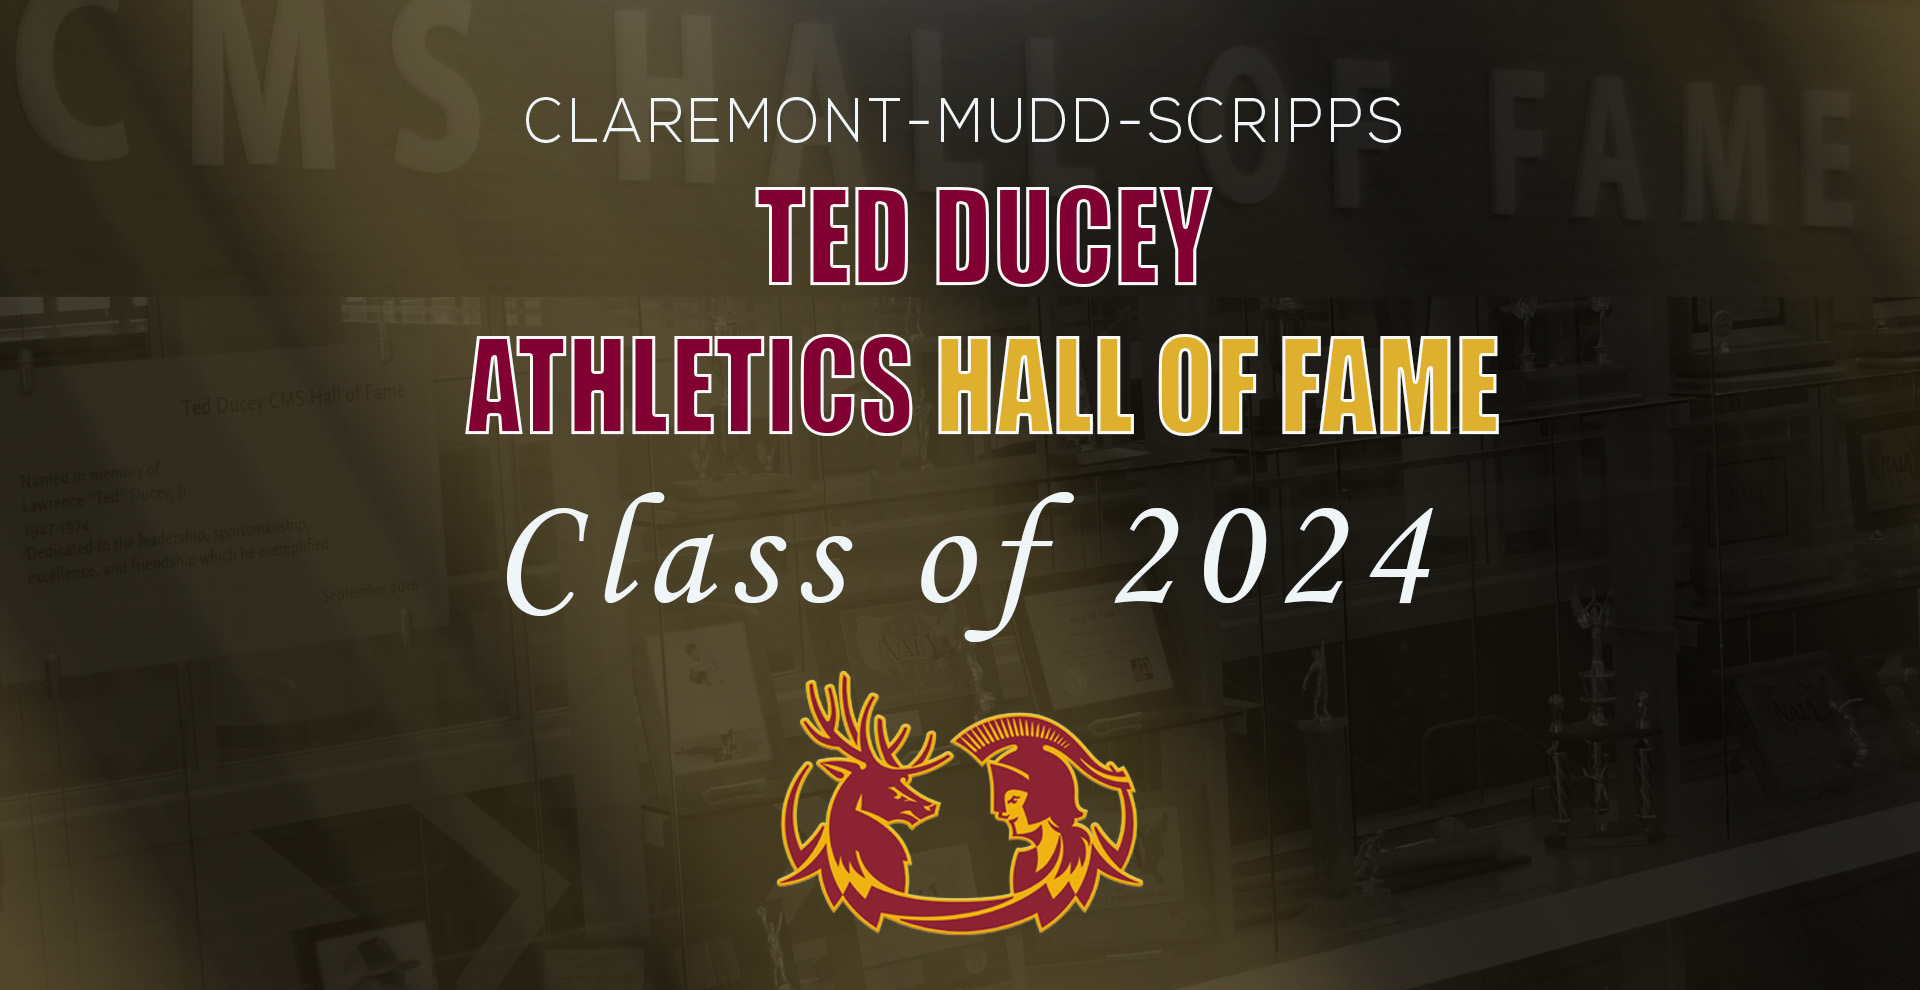 A CMS logo and the words "Ted Ducey Athletics Hall of Fame Class of 2024"